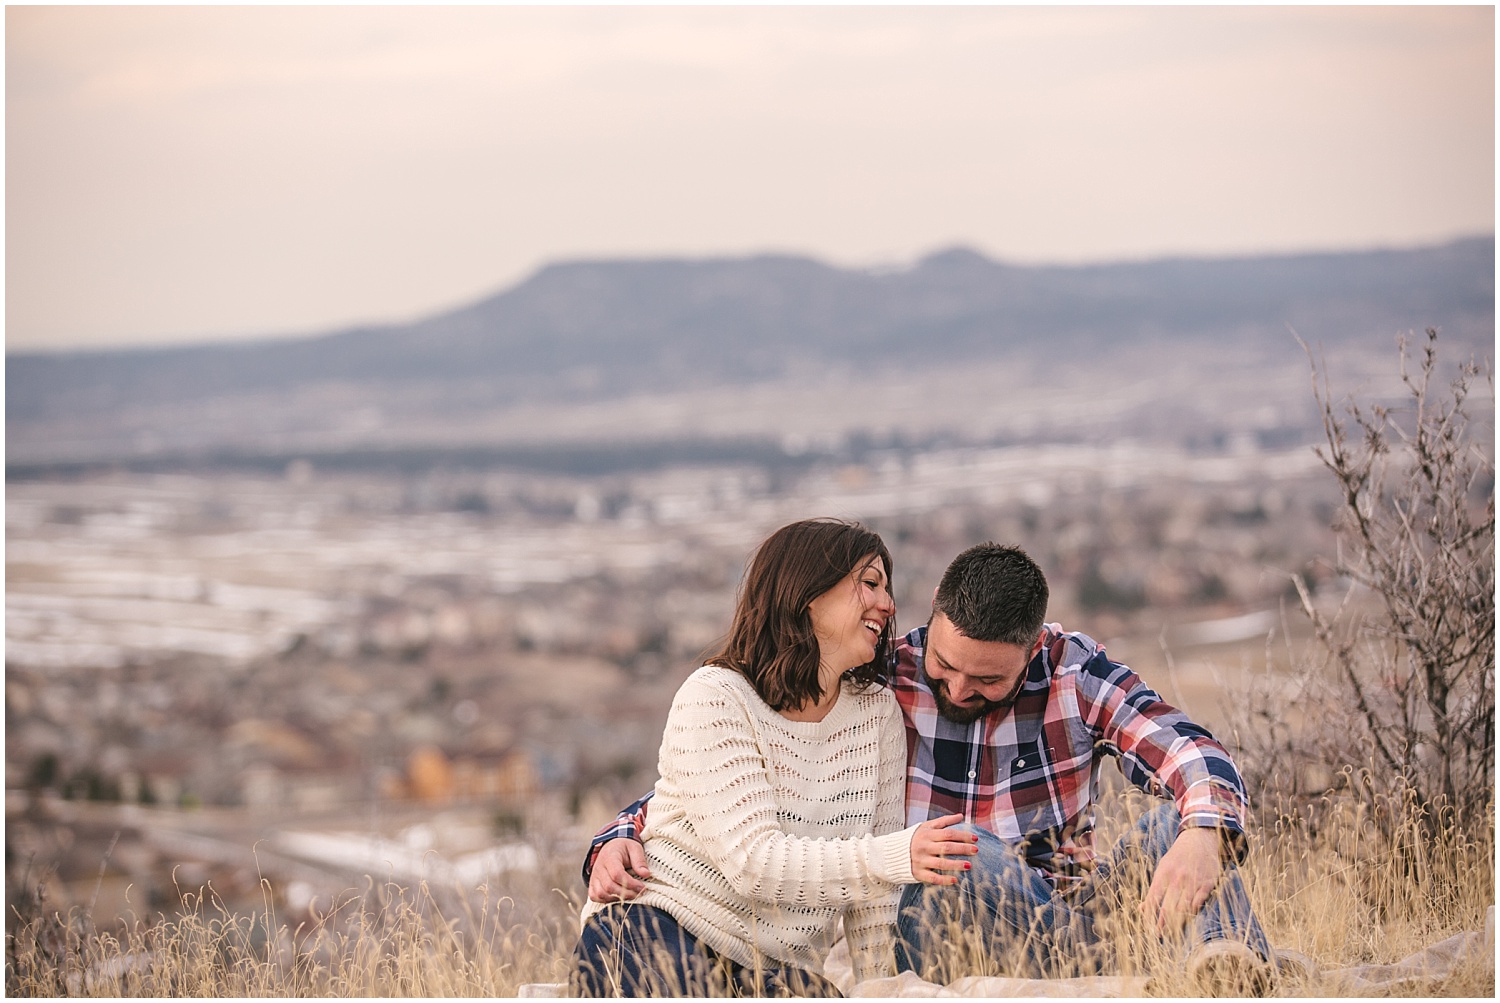 Castle Rock Colorado engagement photos with mountain views at sunset.